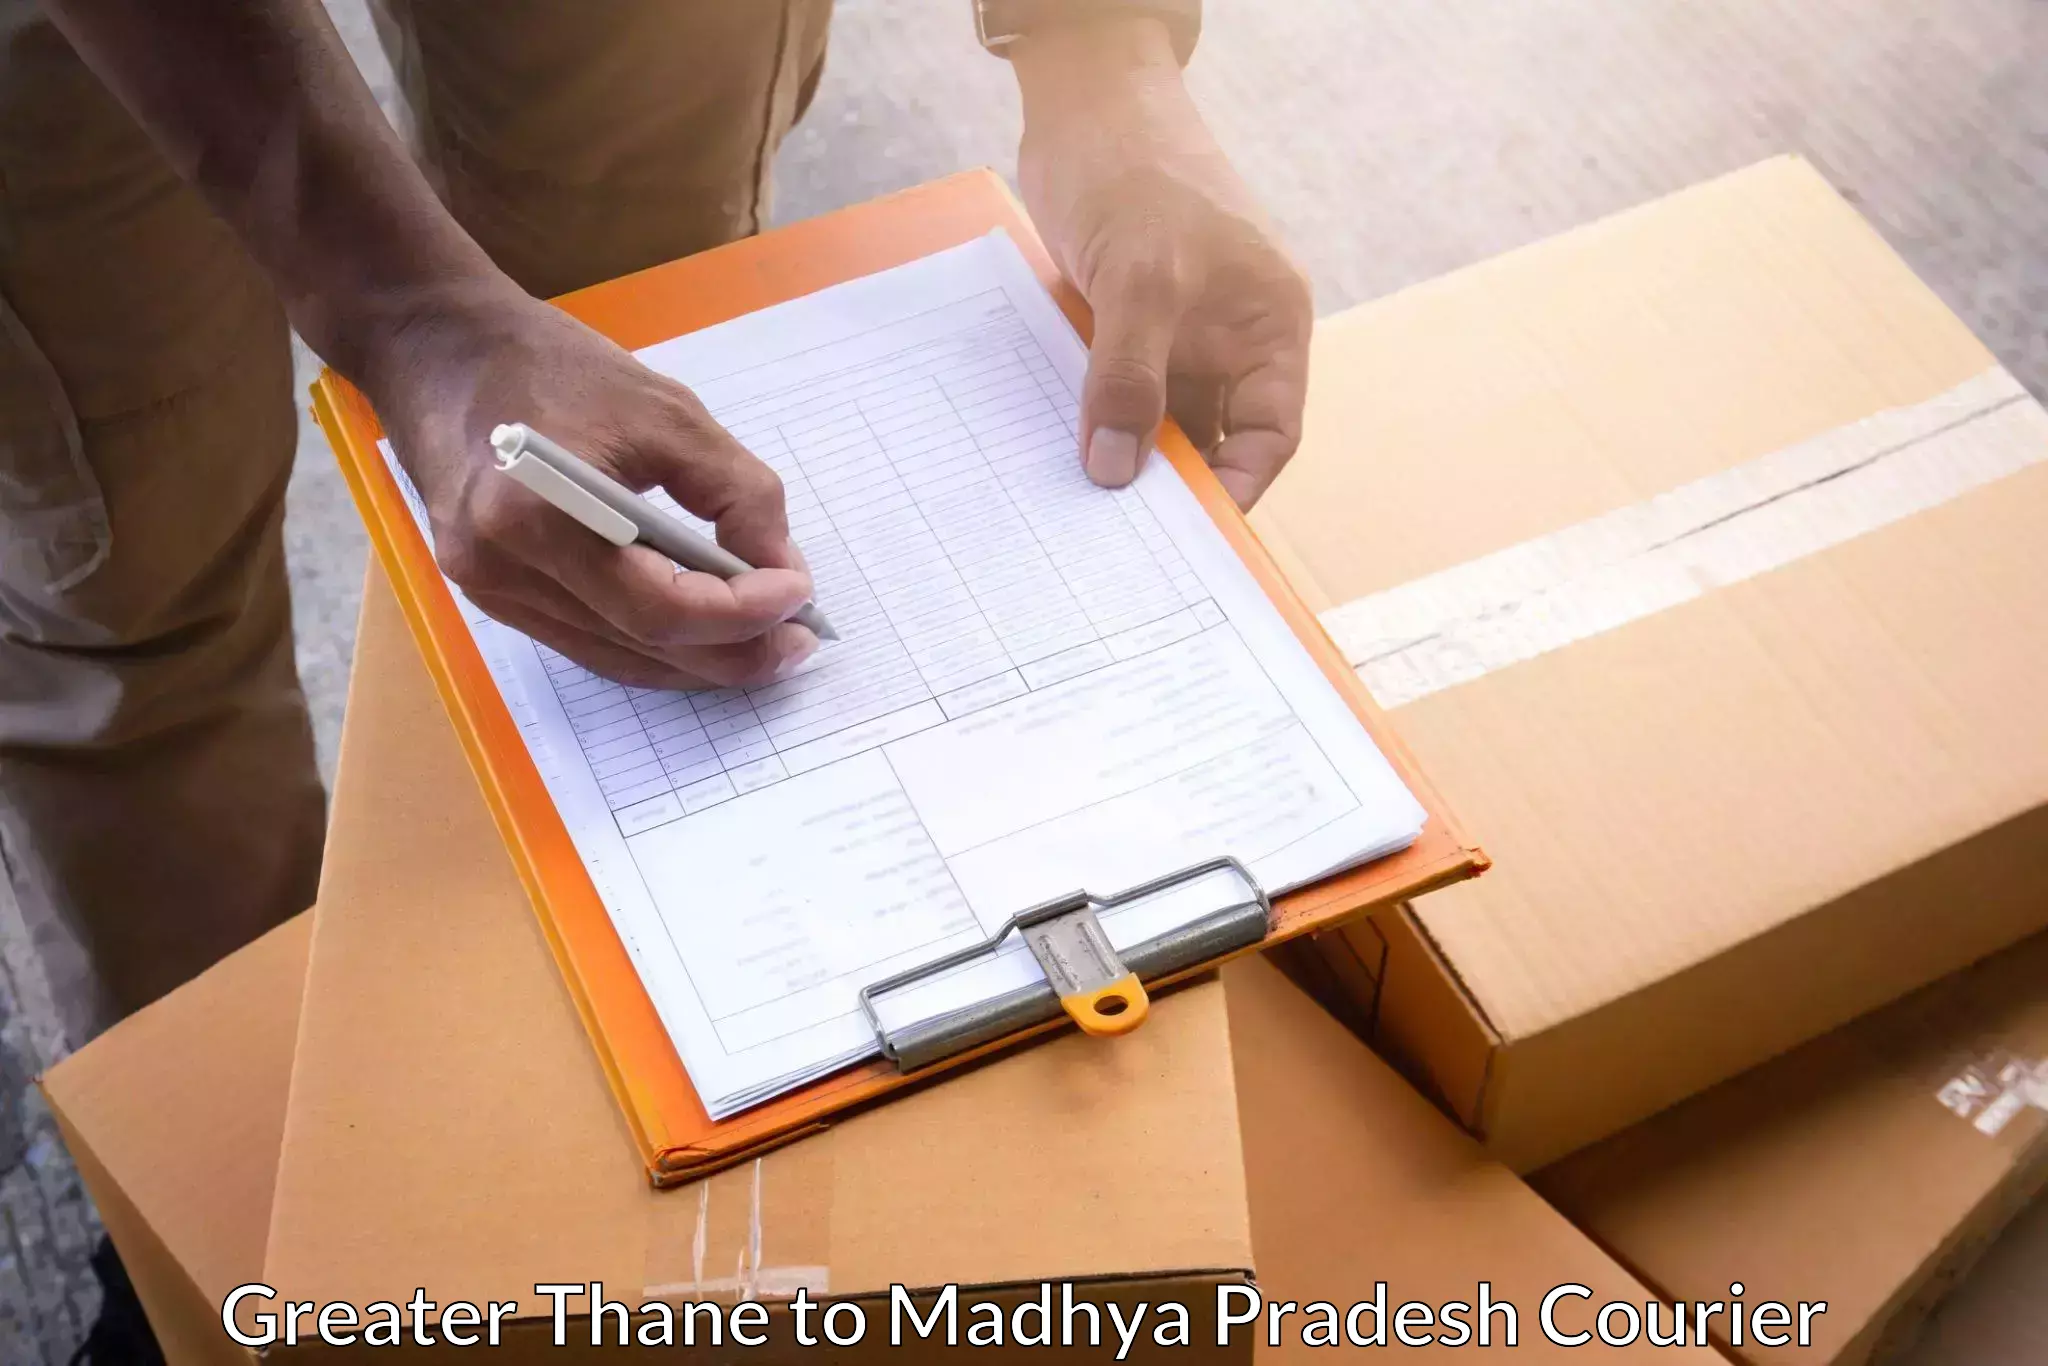 Courier app Greater Thane to Pandhurna